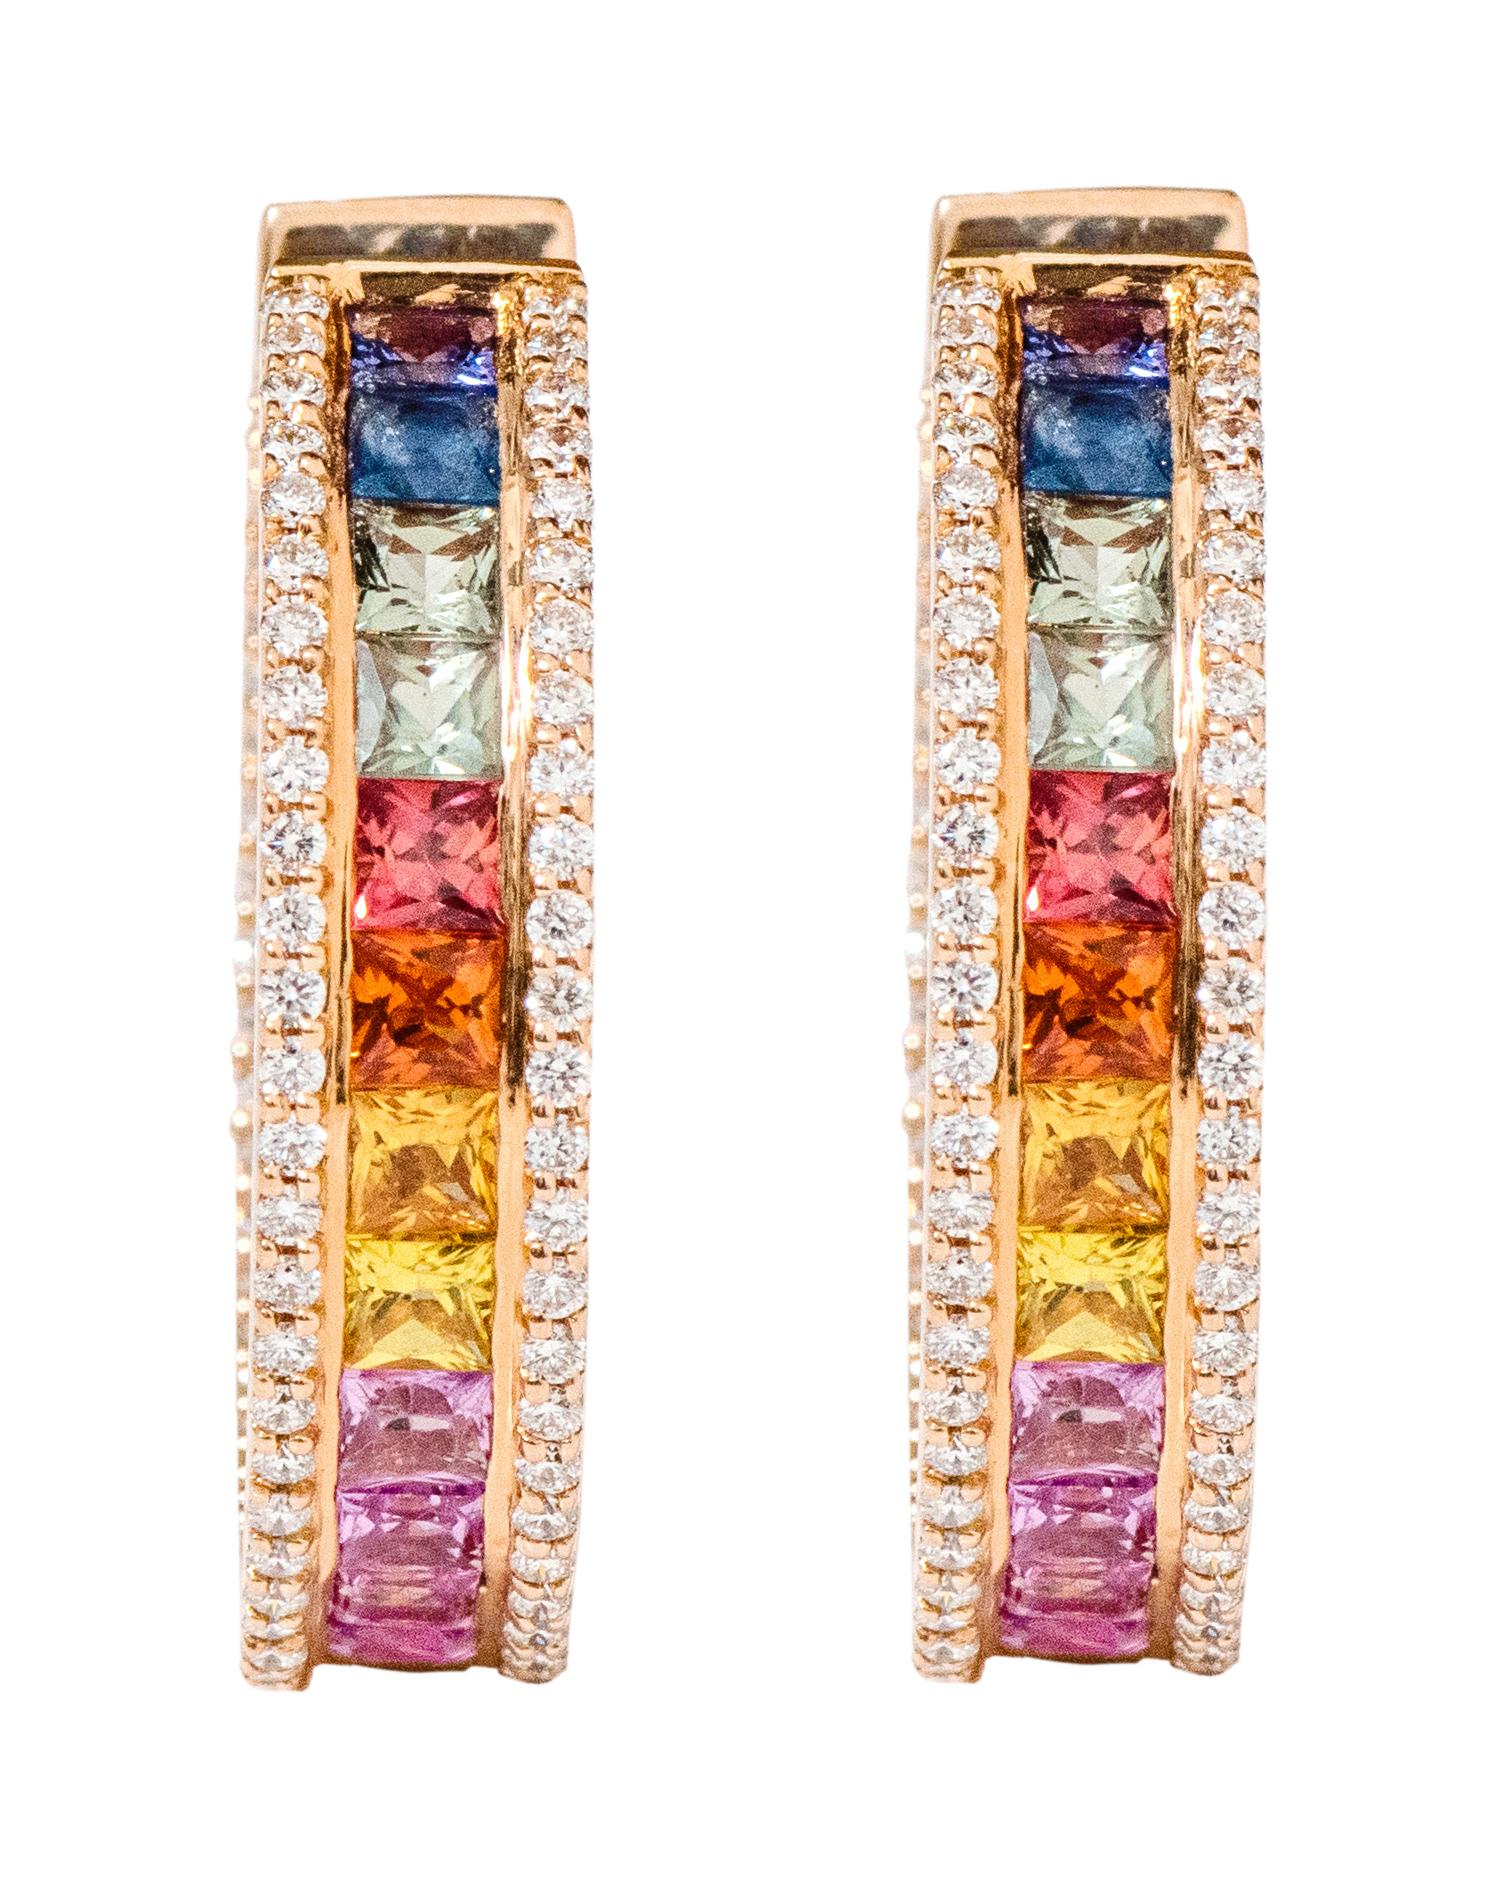 18 Karat Rose Gold 9.33 Carat Multi-Color Sapphire and Diamond Hoop Earrings 

The enchanting rainbow multi-sapphire and diamond full hoop are gratifying. The solitaire identical size princess cut multi-sapphires in channel setting enclosed within